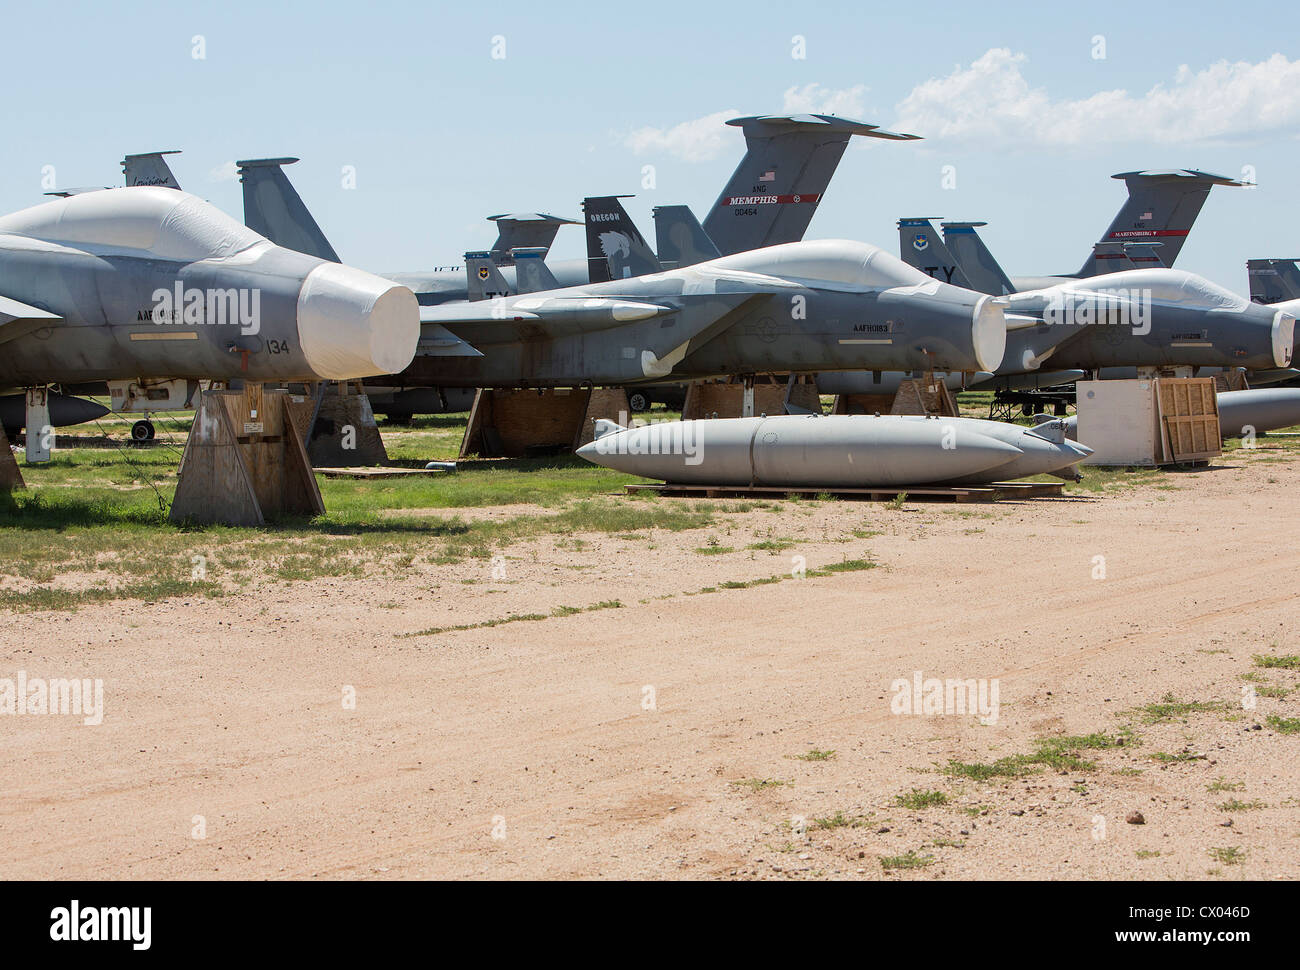 F-15 Eagle aircraft in storage at the 309th Aerospace Maintenance and Regeneration Group at Davis-Monthan Air Force Base. Stock Photo